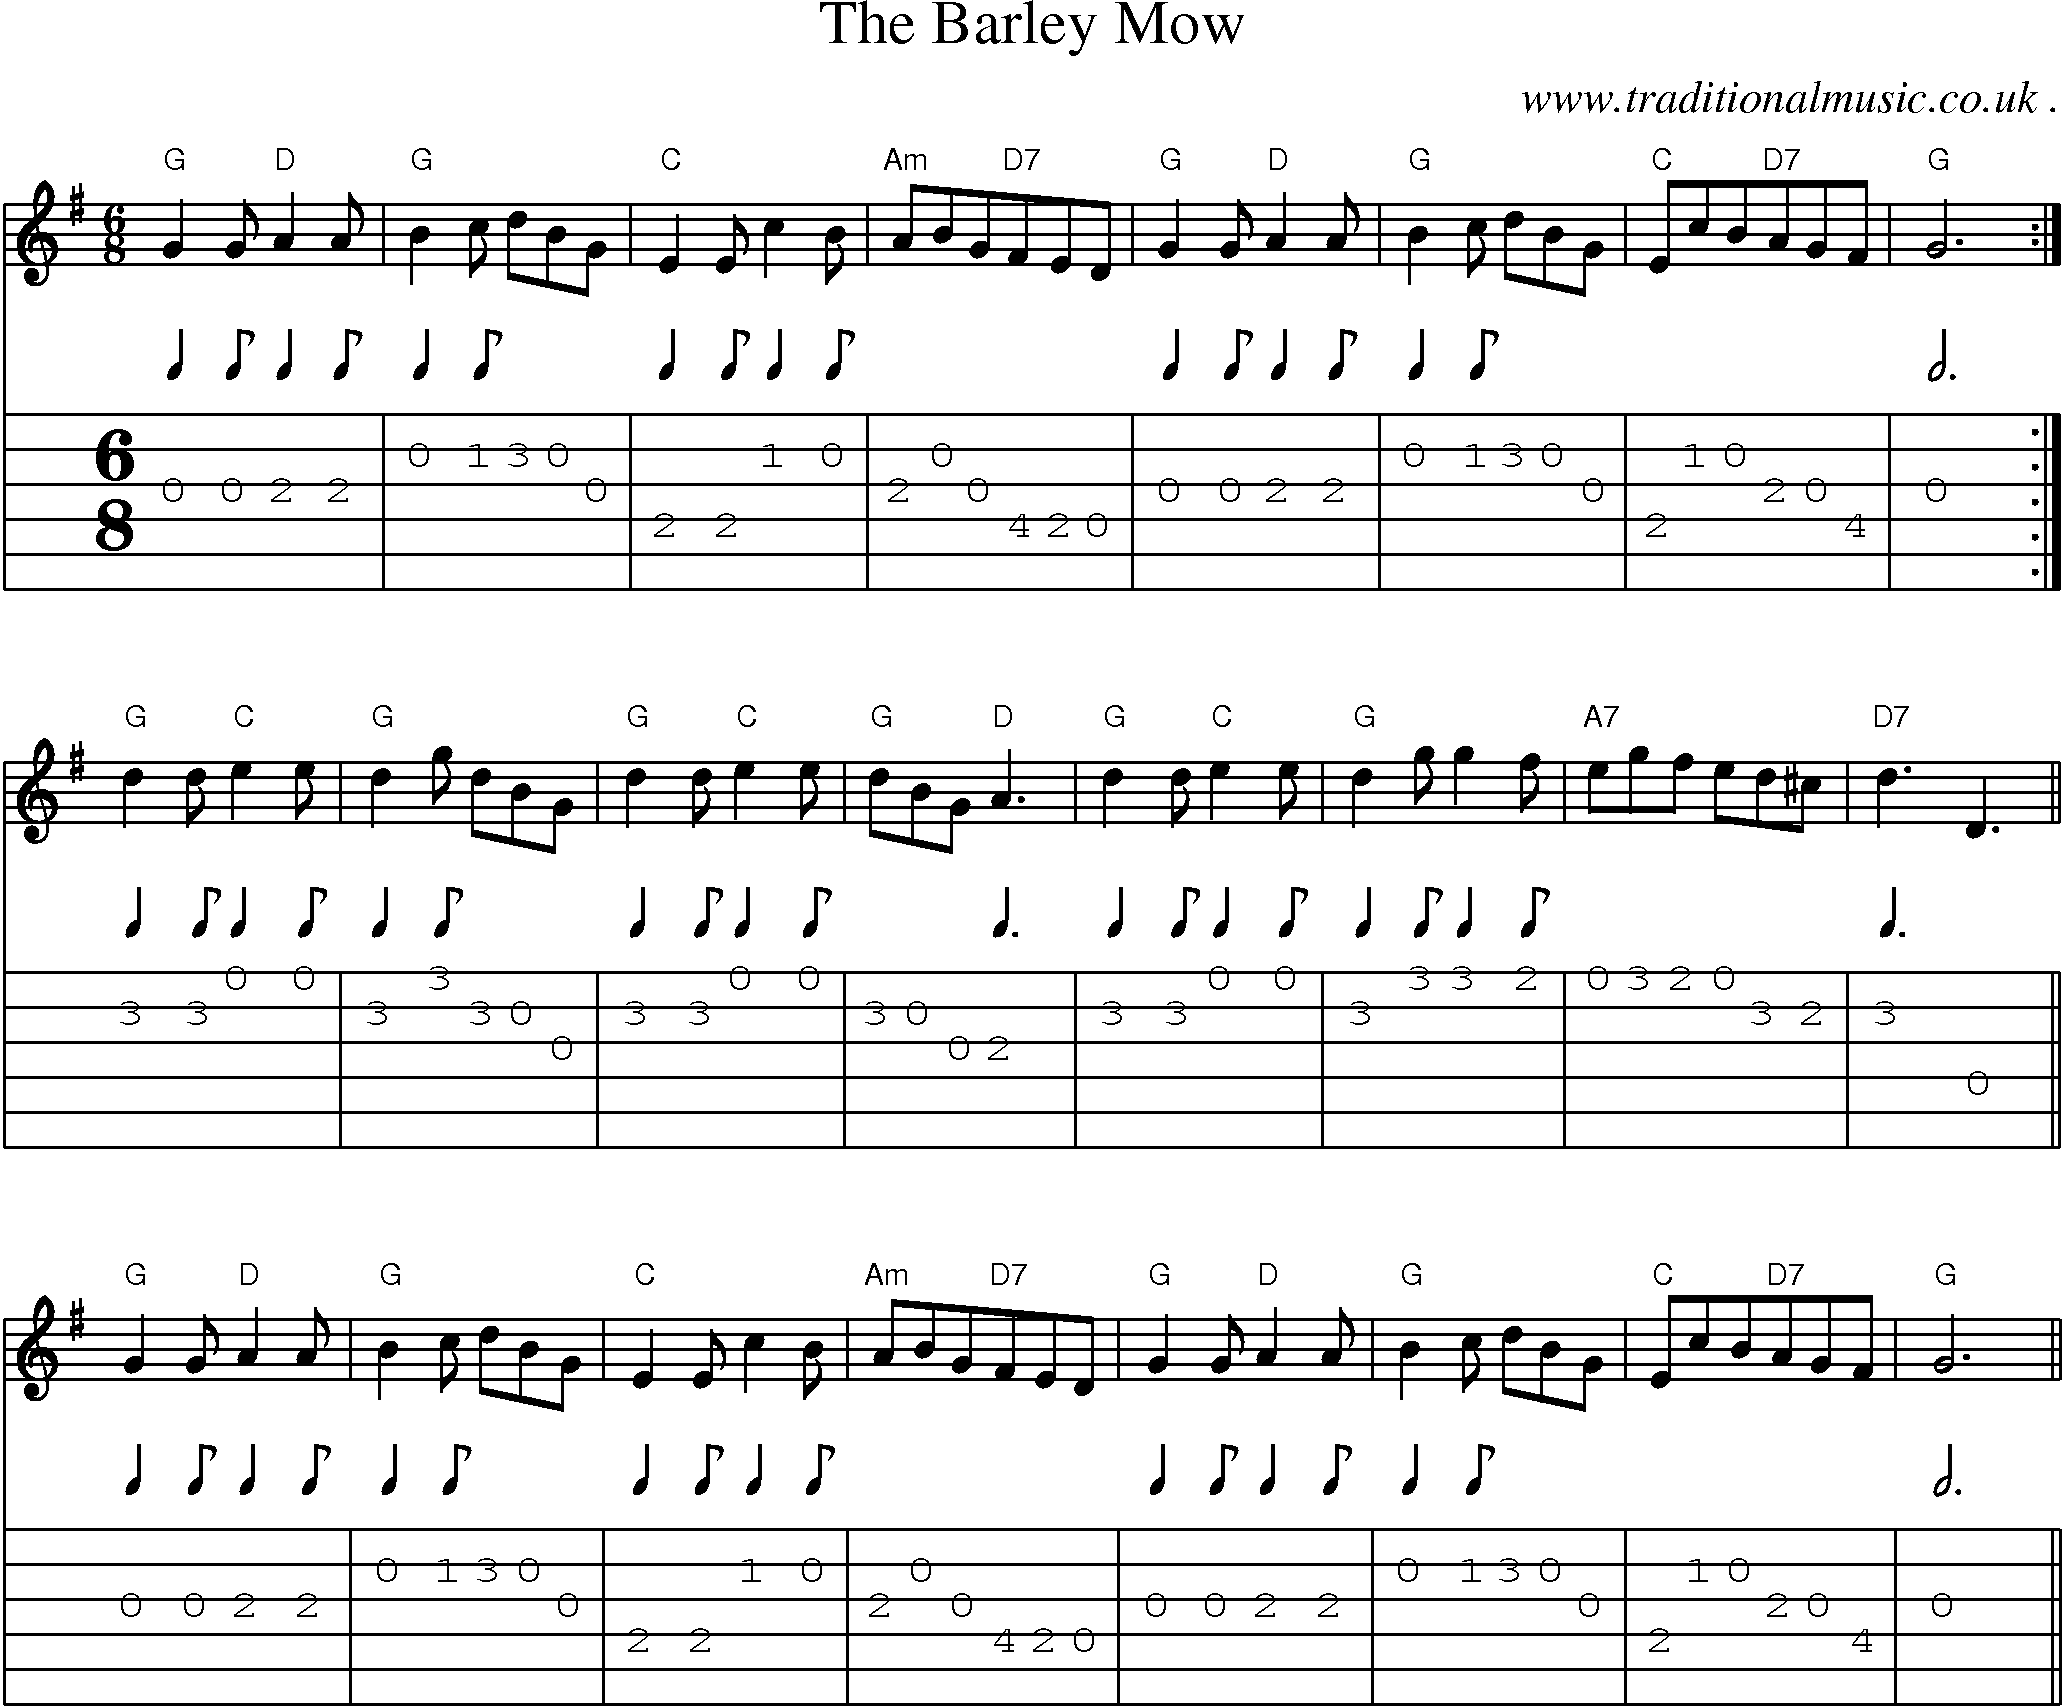 Sheet-Music and Guitar Tabs for The Barley Mow